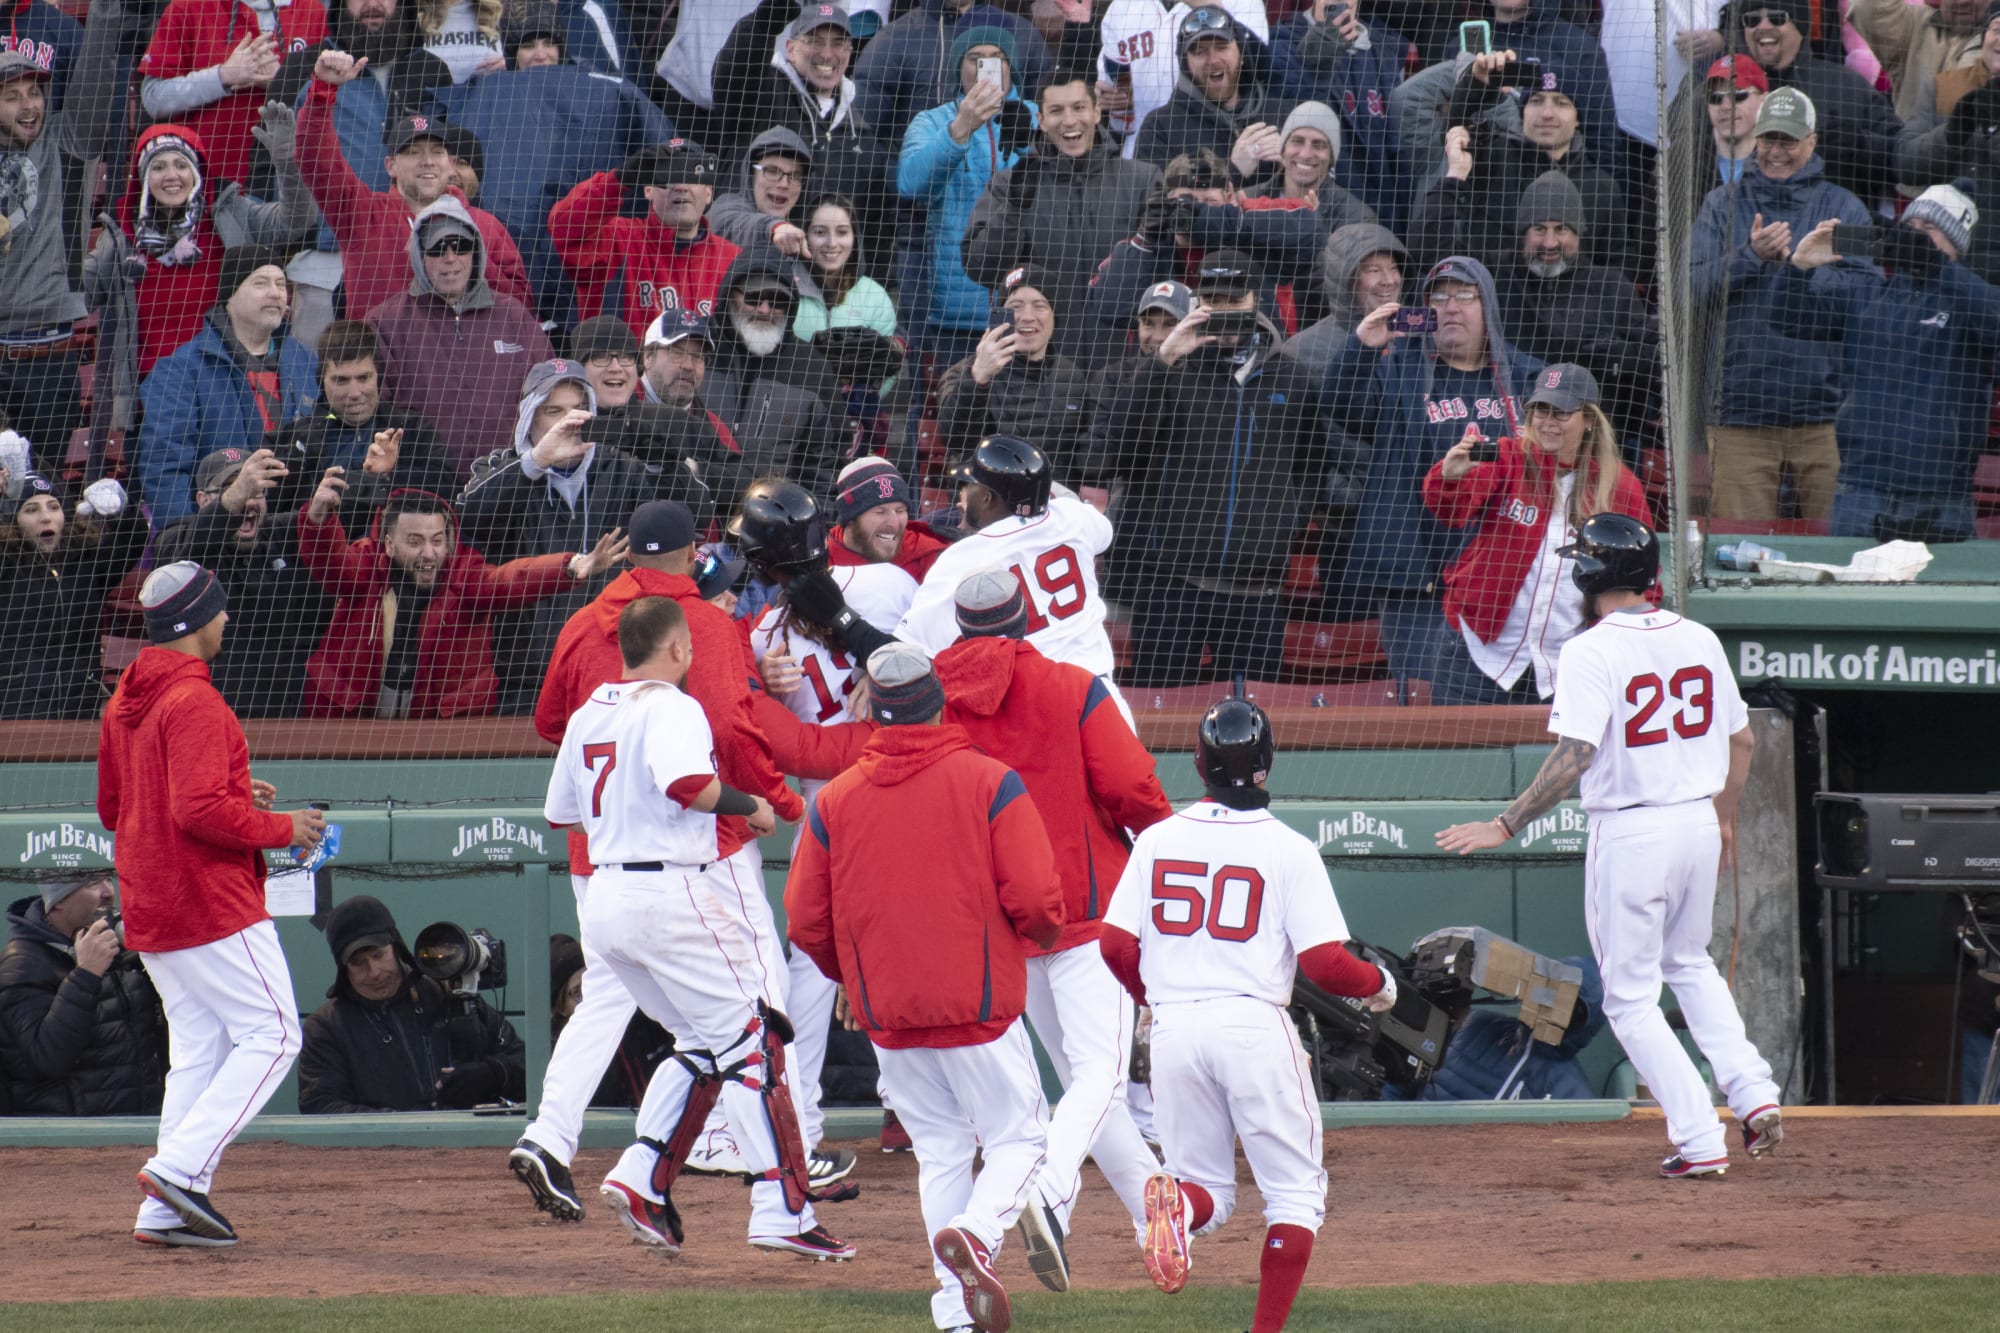 Boston Red Sox best hitters by Statcast reveal a few surprises